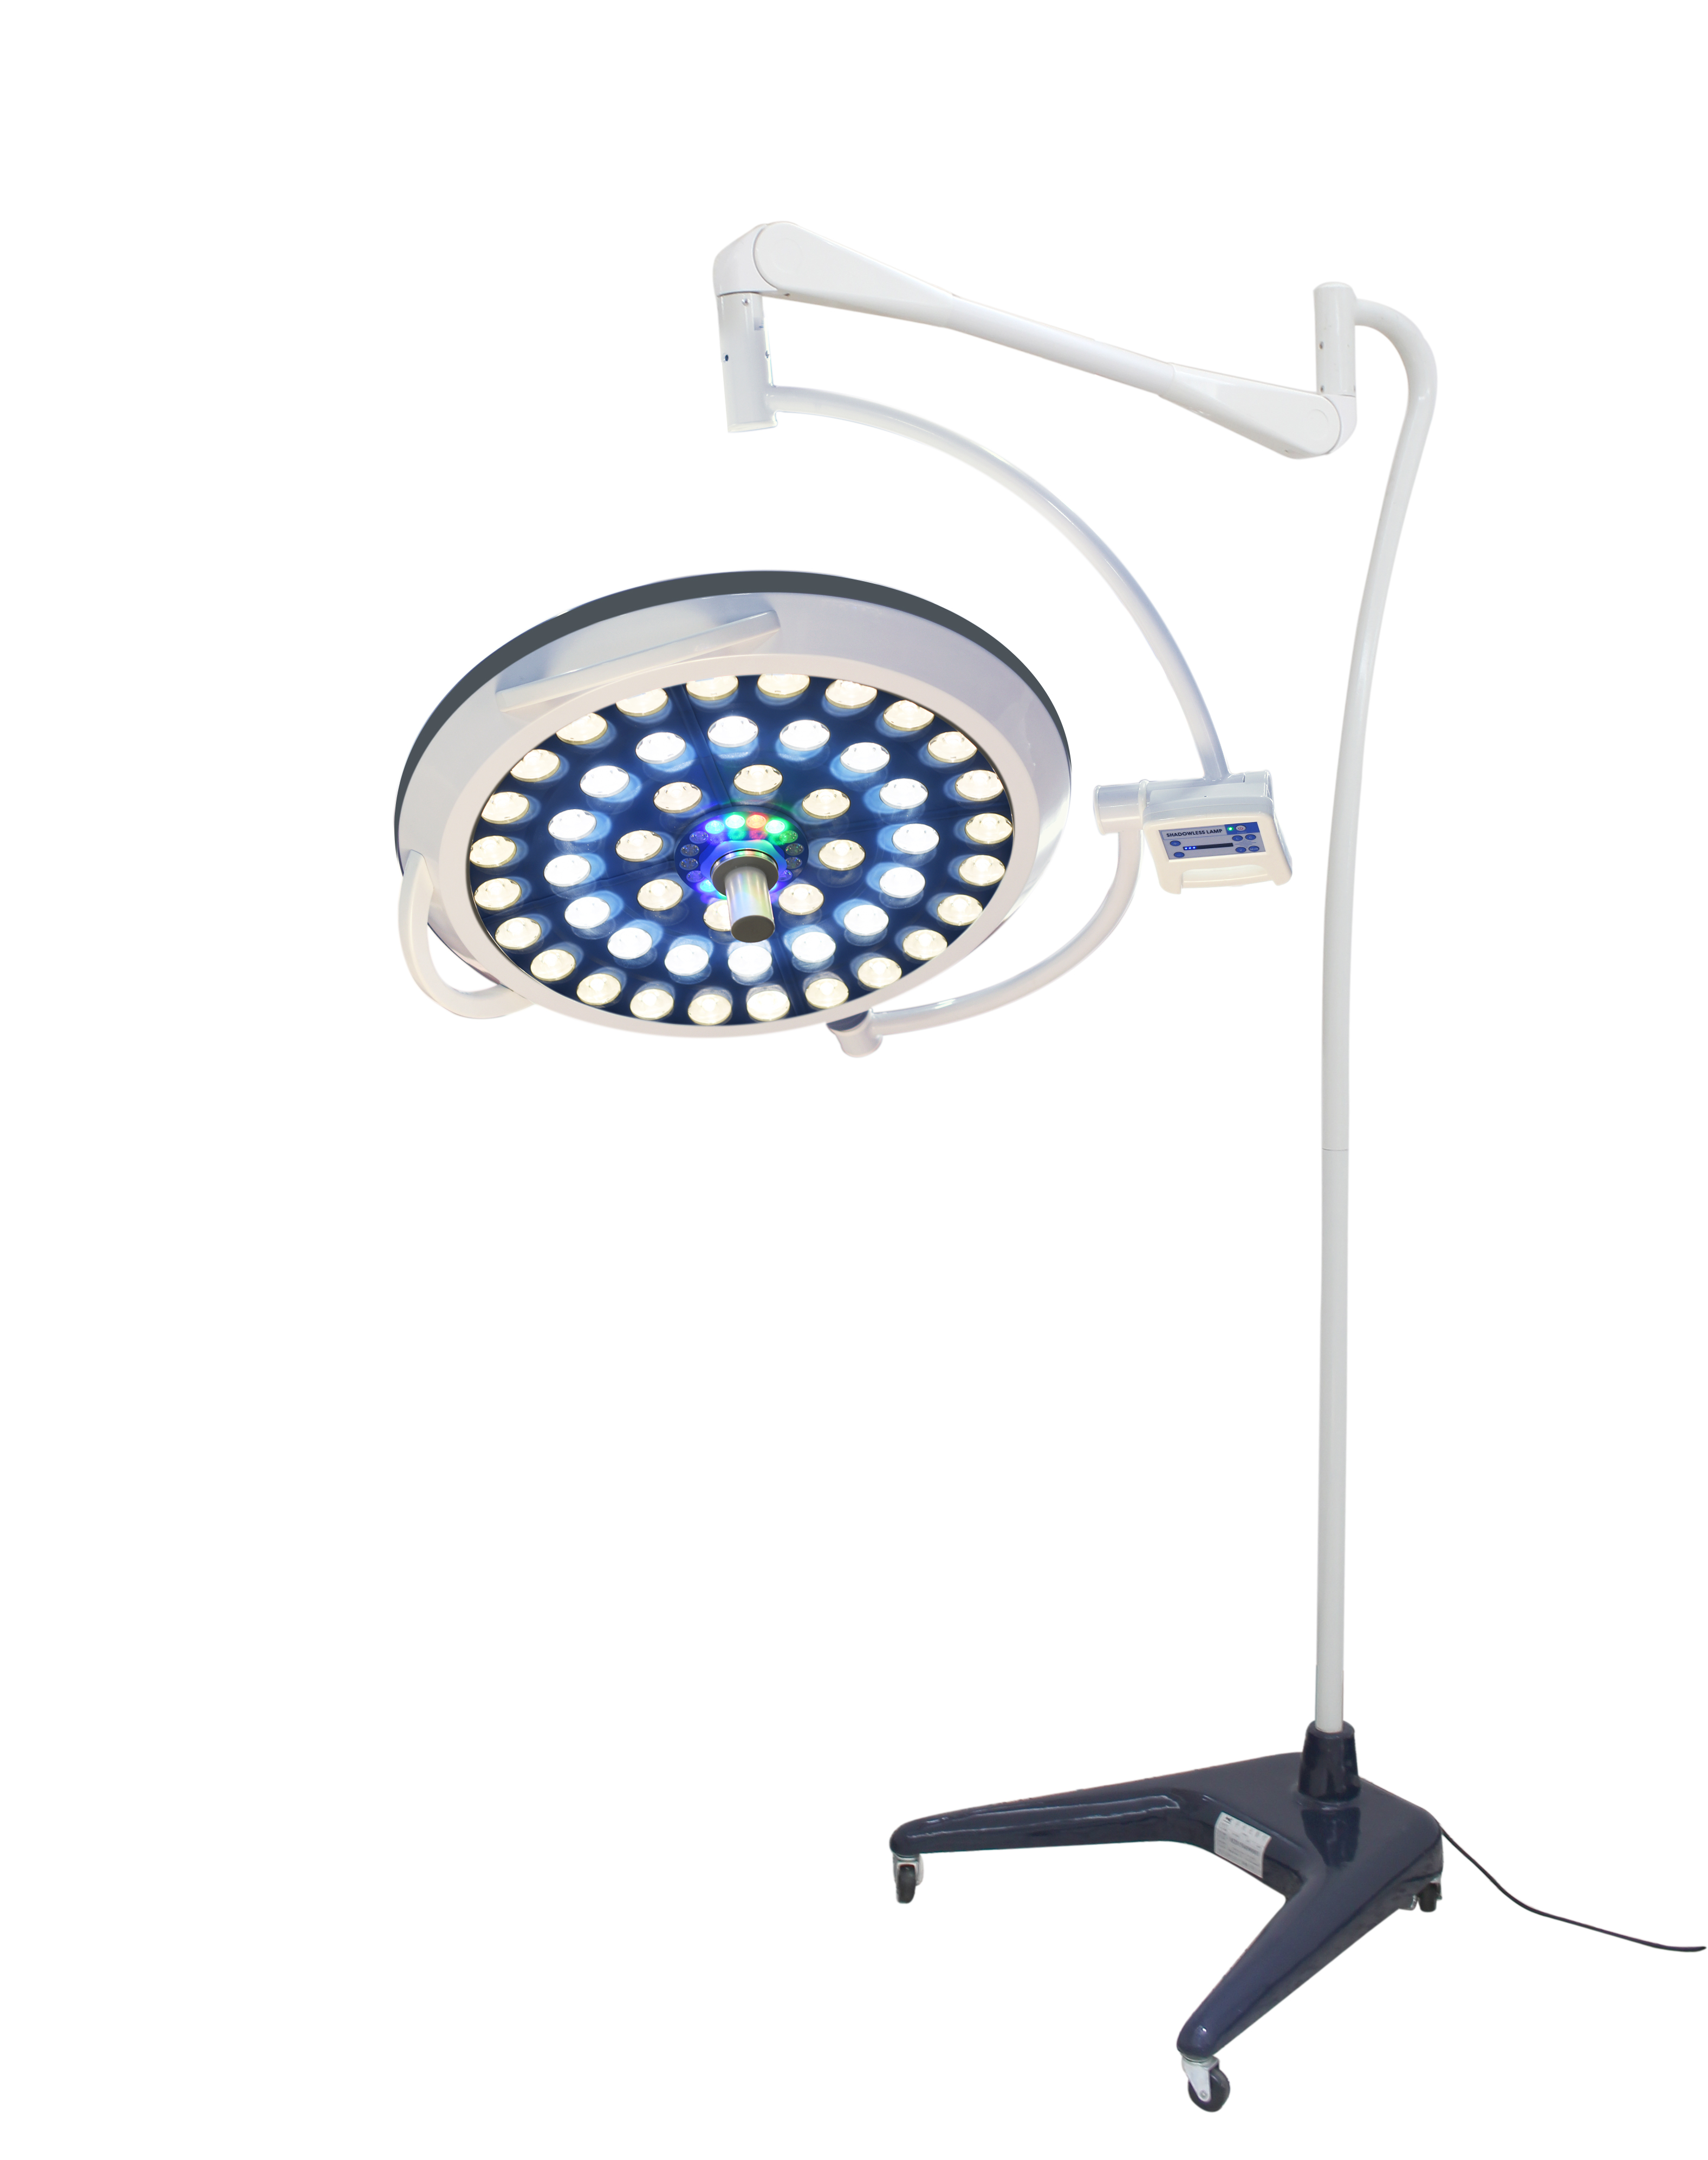 China OEM Infrared Physical Therapy Lamp - Medical Surgical Exam Light Mobile Shadowless Lamp Adjustable – Micare